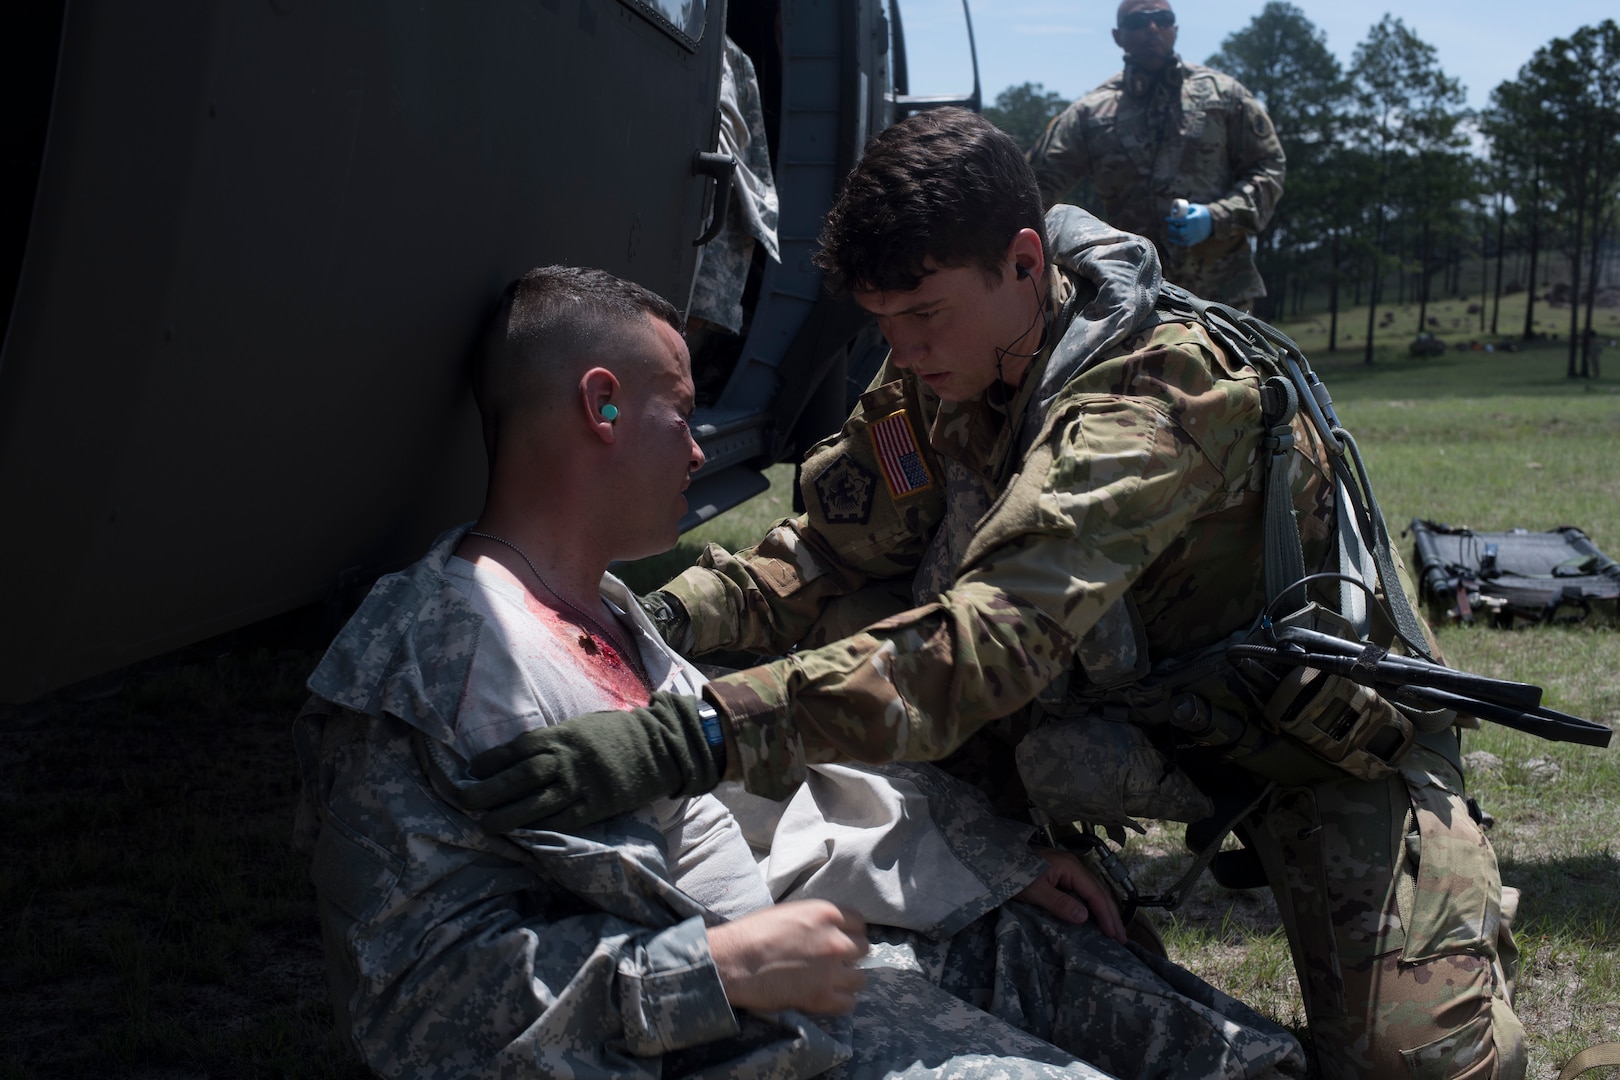 U.S. Army Sgt. Alicia Baum, 1st Battalion 228th Aviation Regiment flight paramedic, assess the injuries of a simulated aircraft casualty during a search and rescue exercise, May 21, 2019, in Comayagua, Honduras. Members from various units on Joint Task Force – Bravo participated in the exercise that simulated a HH-60 Blackhawk crashed during a routine flight carrying personnel. The exercise practiced notification, recall, search and rescue, on-scene medical care, recovery of personnel from low and high angle austere terrain, and medical care once the injured returned to base. (U.S. Air Force photo by Staff Sgt. Eric Summers Jr.)